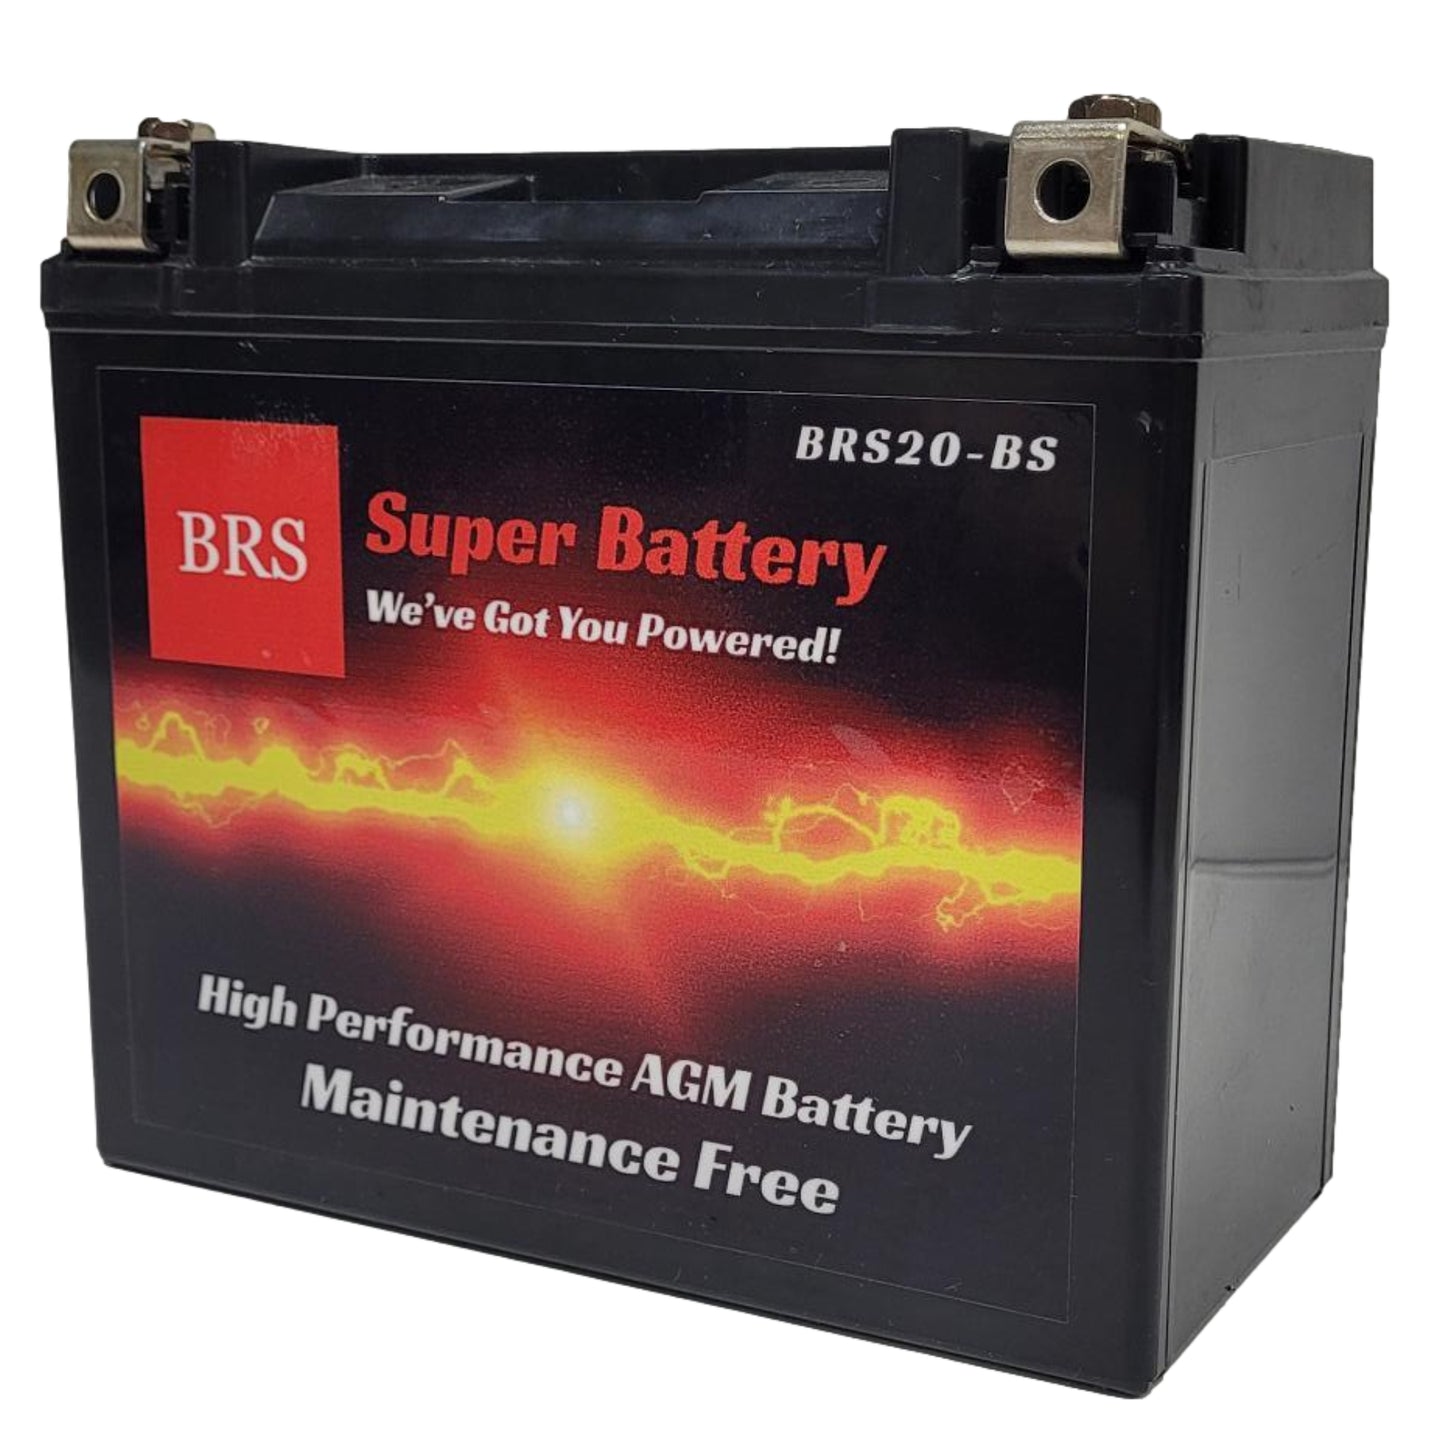 WPX20-BS 12v High Performance Sealed AGM PowerSport 2 Year Battery - BRS Super Battery